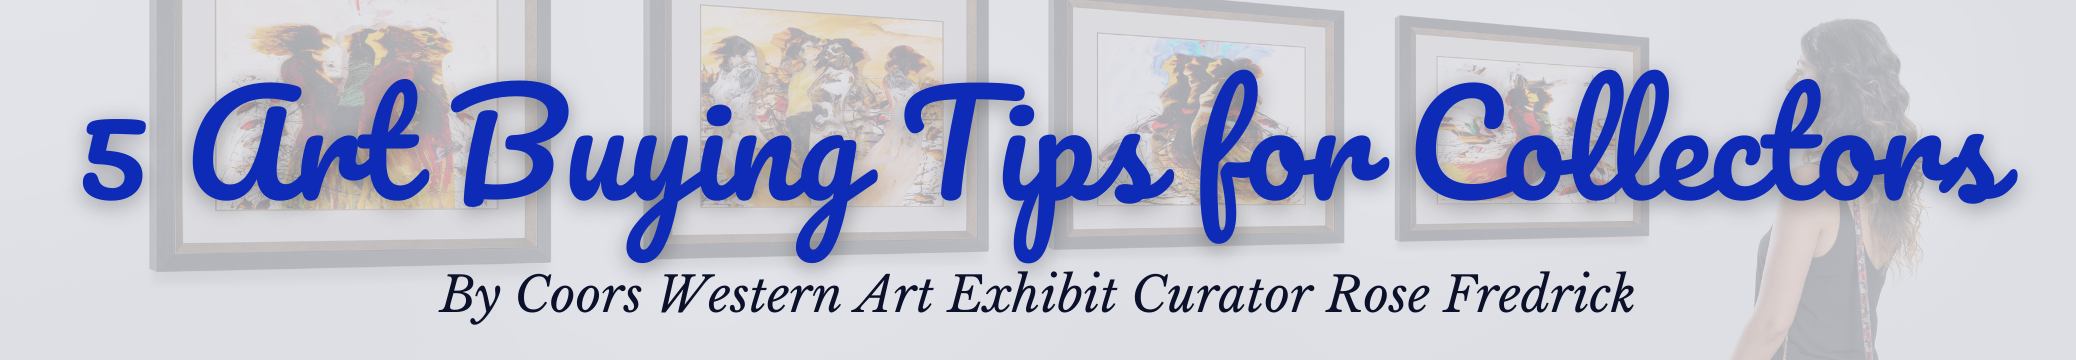 5 Art Buying Tips for Collectors, by Curator Rose Fredrick